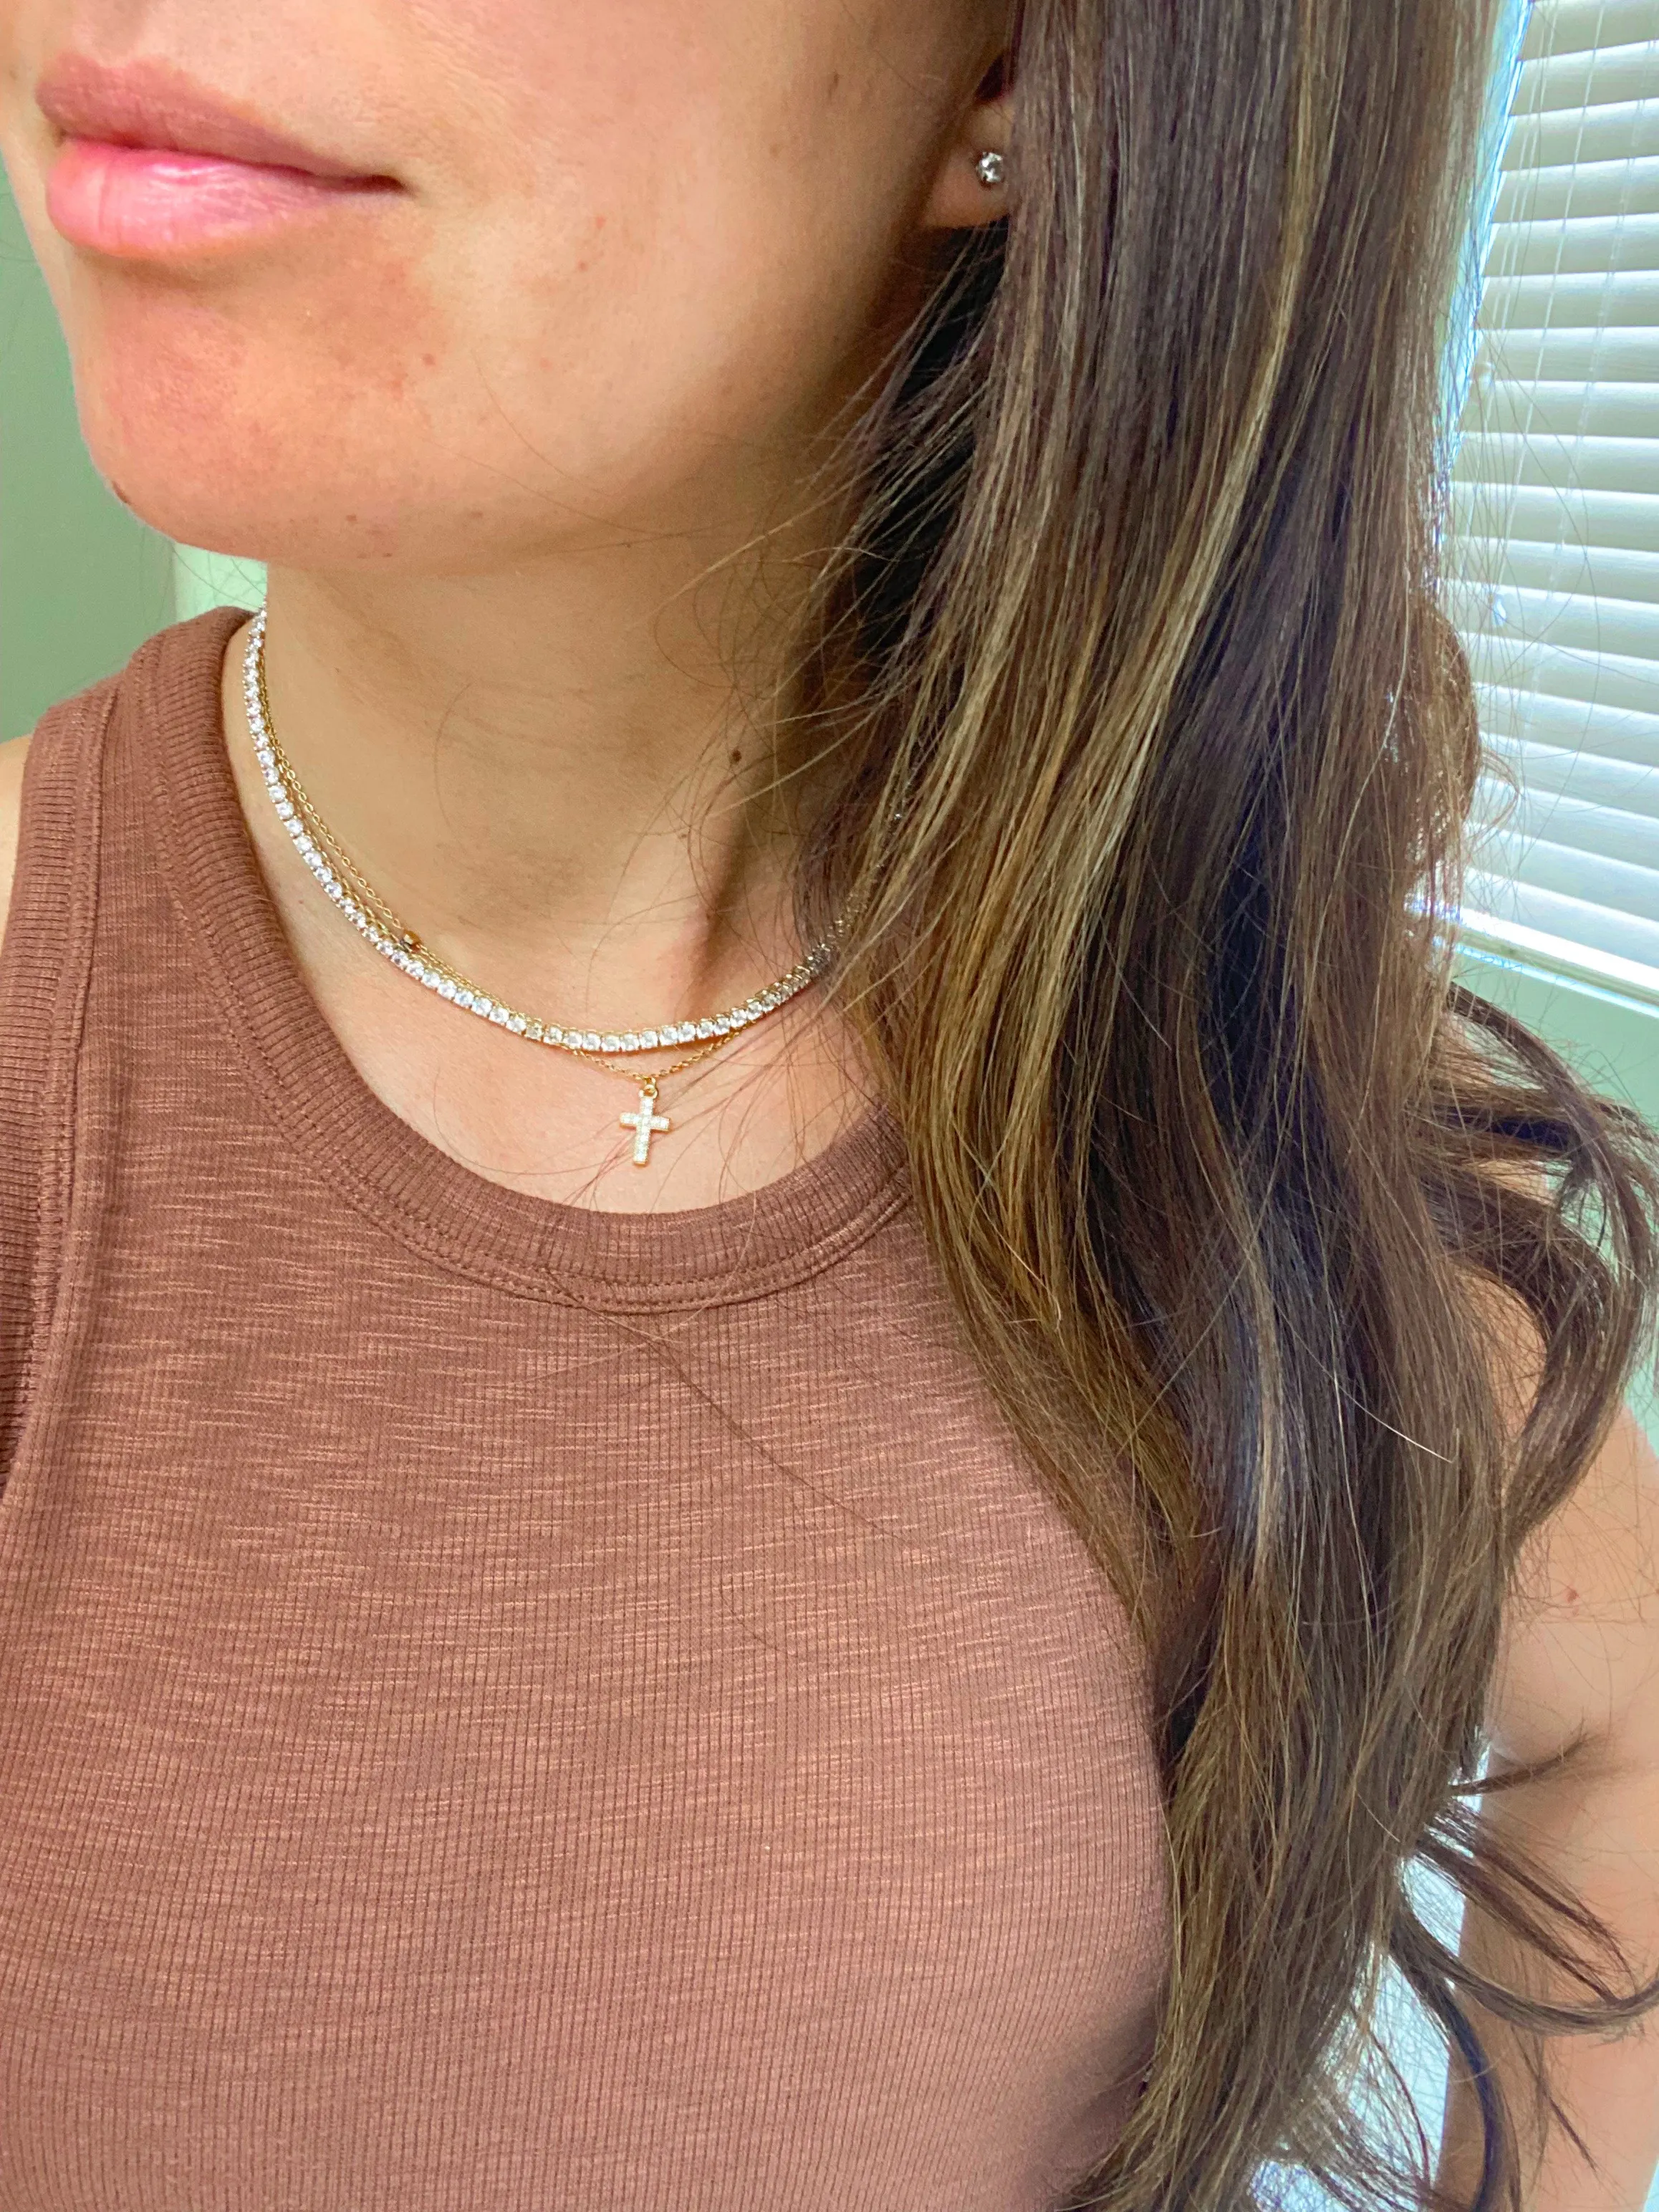 Amazon tennis necklace | Friday Faves 8.11